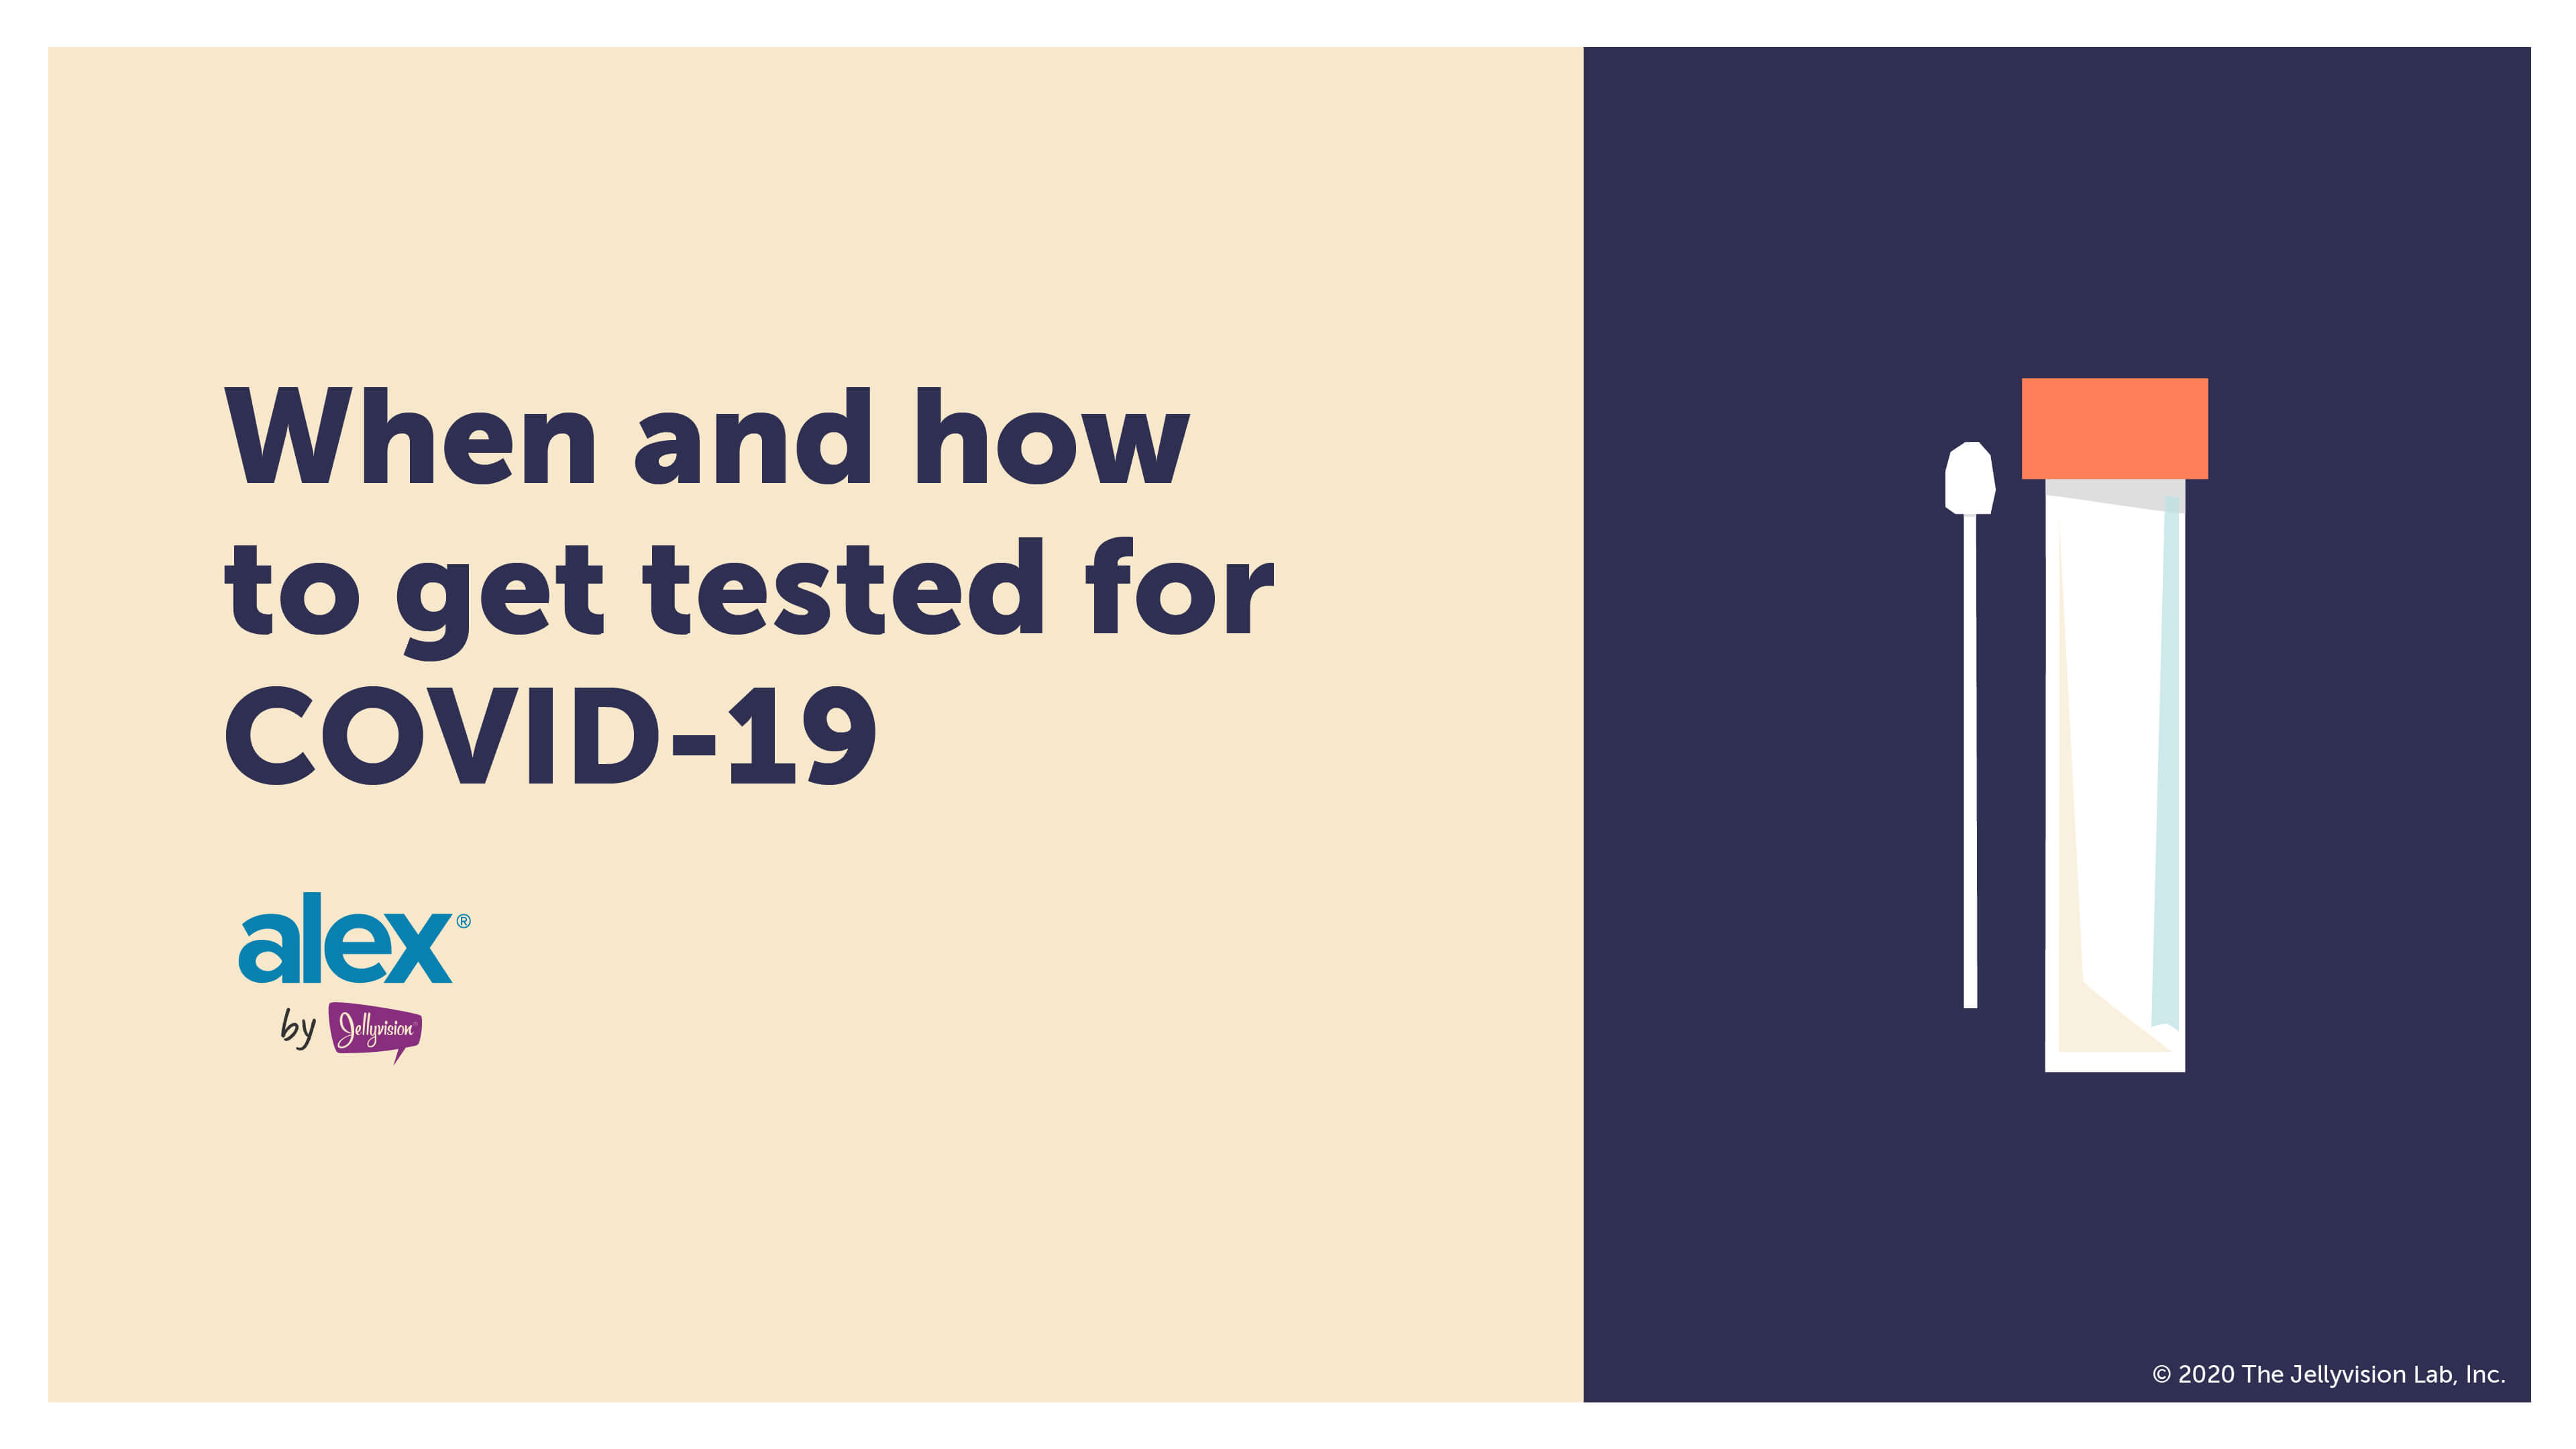 When and how to get tested for COVID-19